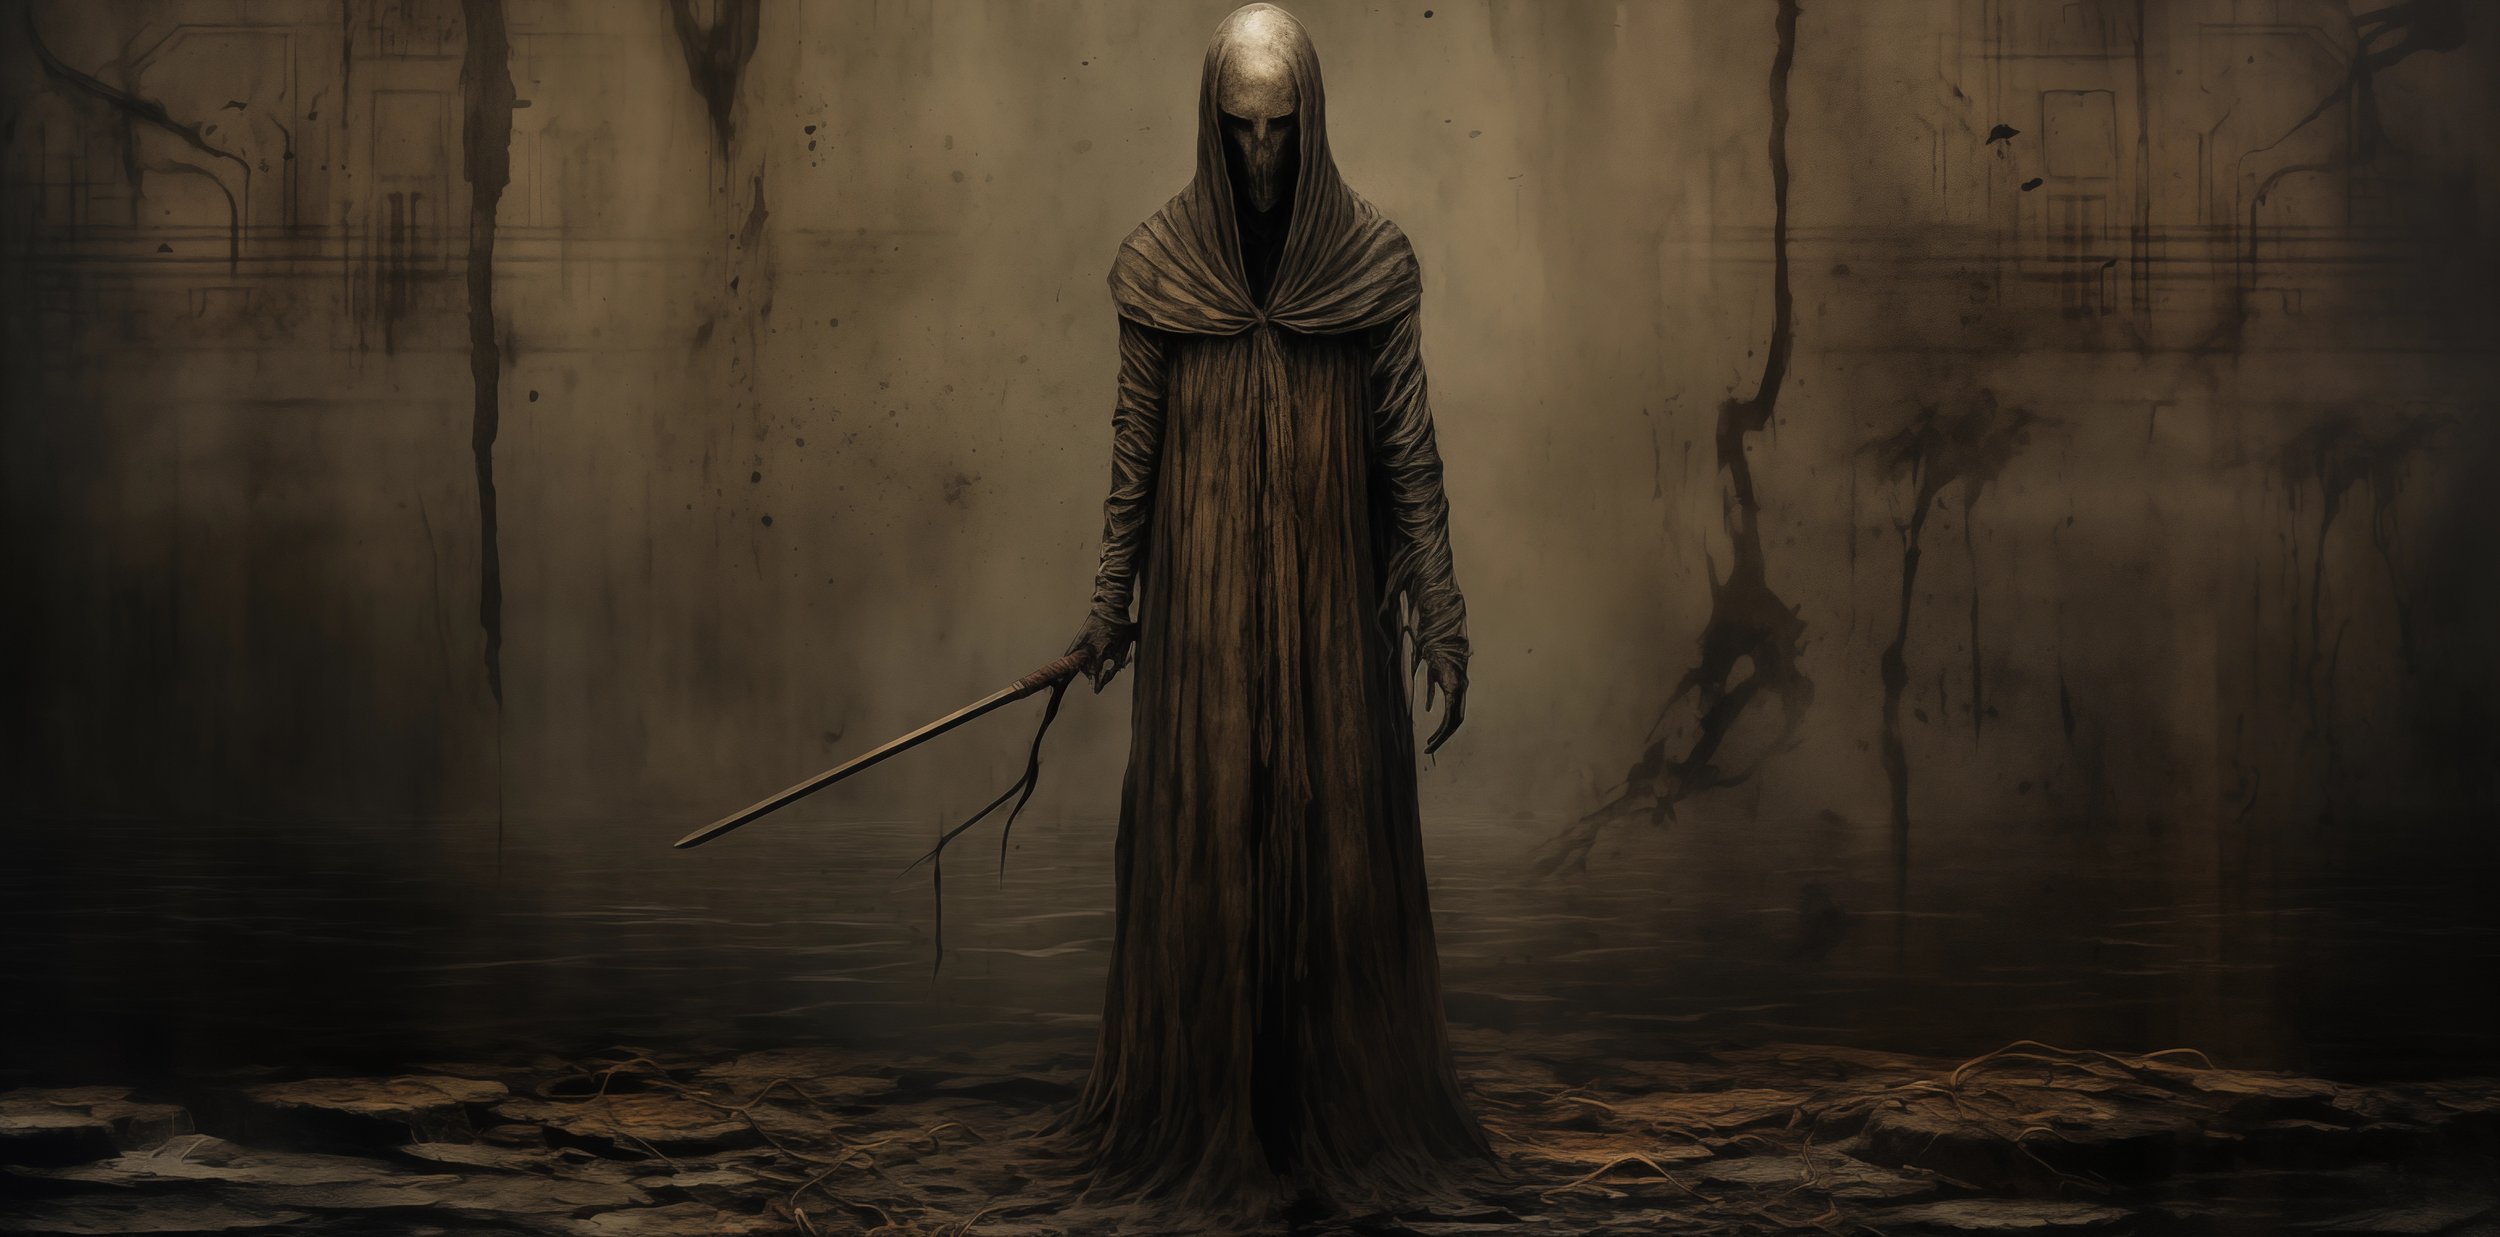 The Reaper of the Silent Flood